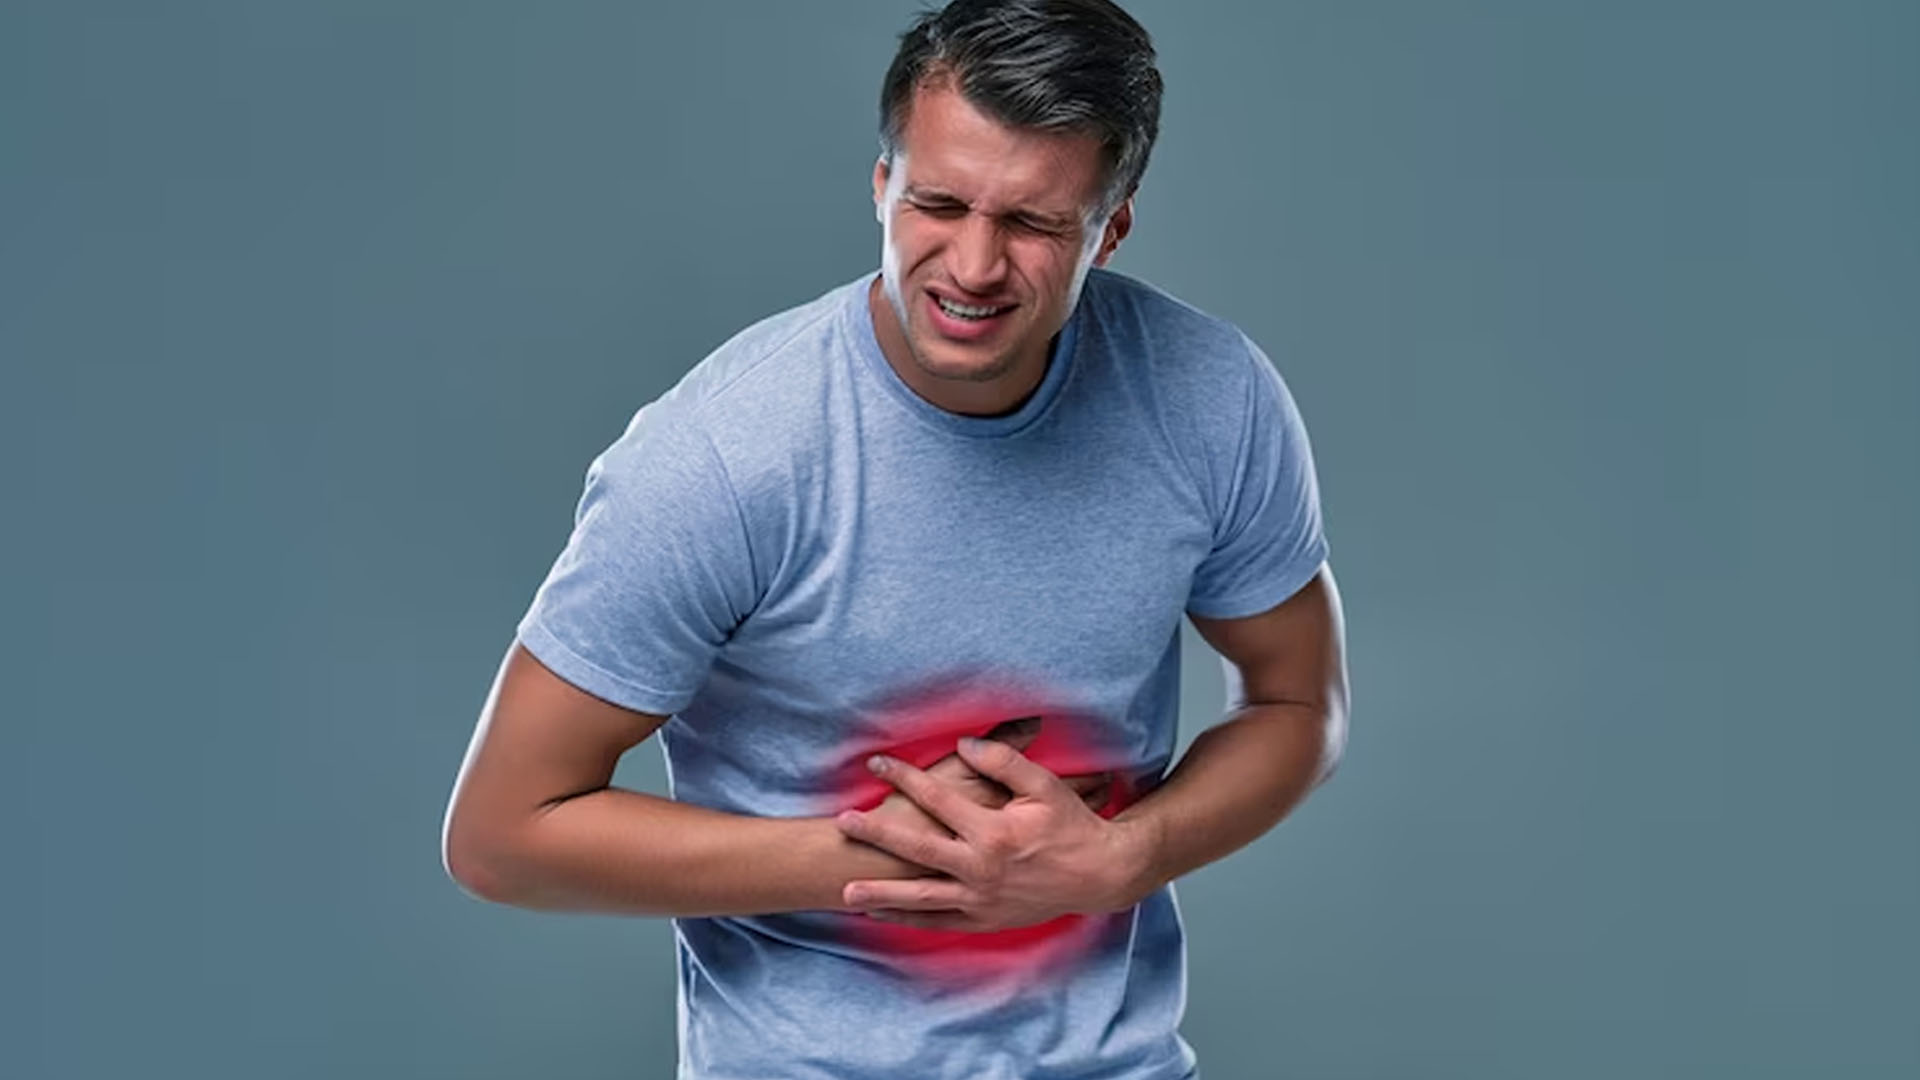 Abdominal Pain: Symptoms, Causes, Treatment, Diagnosis and Diet